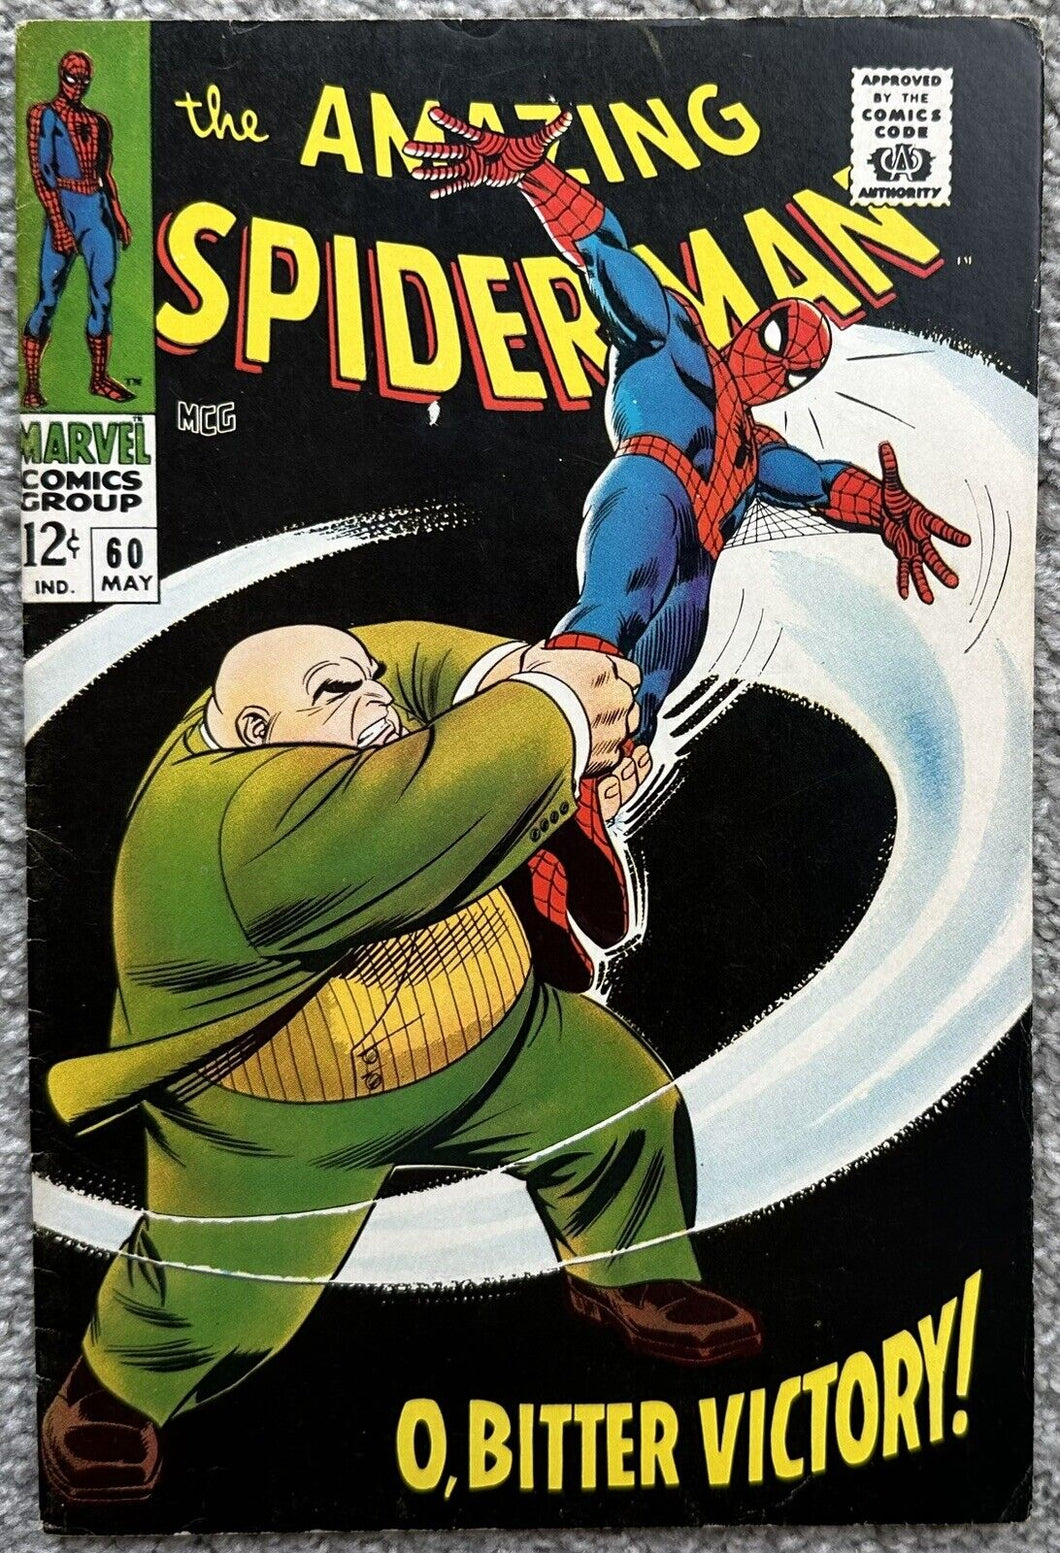 THE AMAZING SPIDER-MAN #60 (MARVEL,1968) Kingpin appearance.